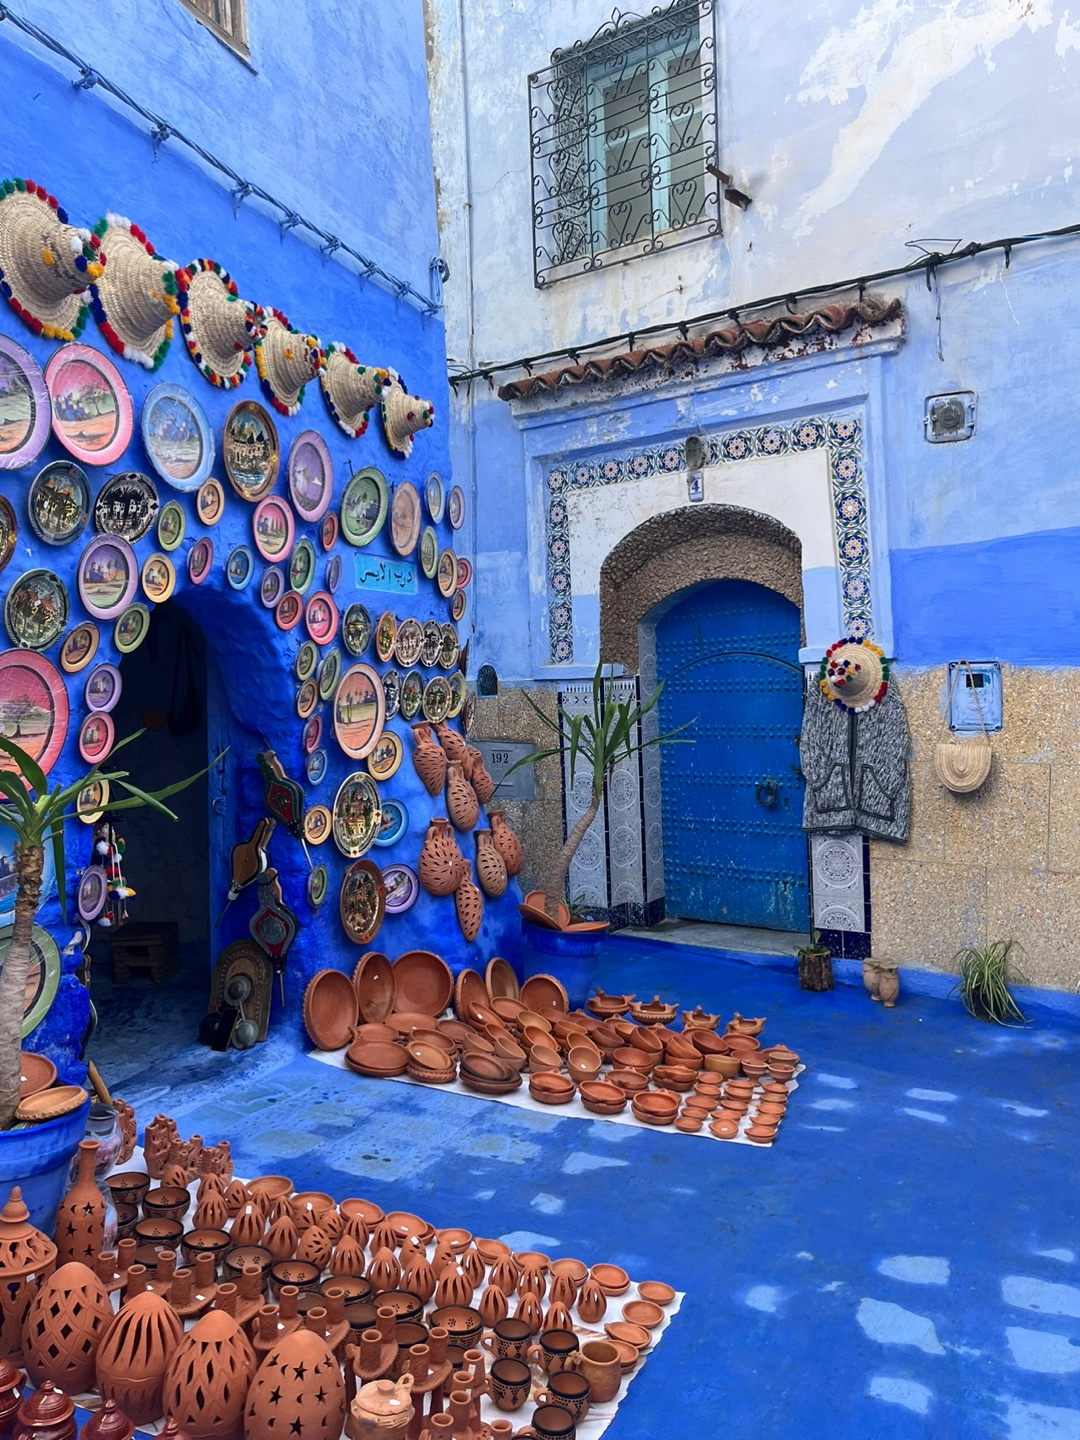 An alley of Chefchaouen, where visitors can buy traditional Moroccan crafts. (Lee Jaeeun/The Korea Herald)